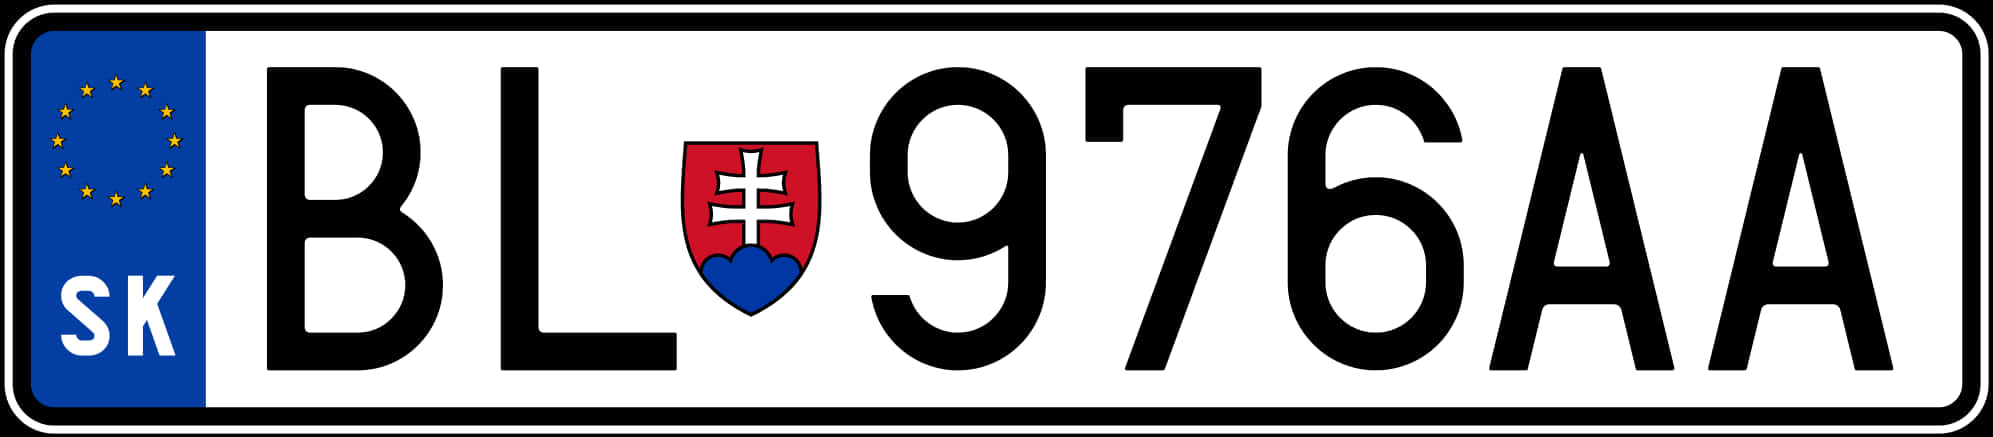 A Black And White Sign With A Red And Blue Number And A Shield